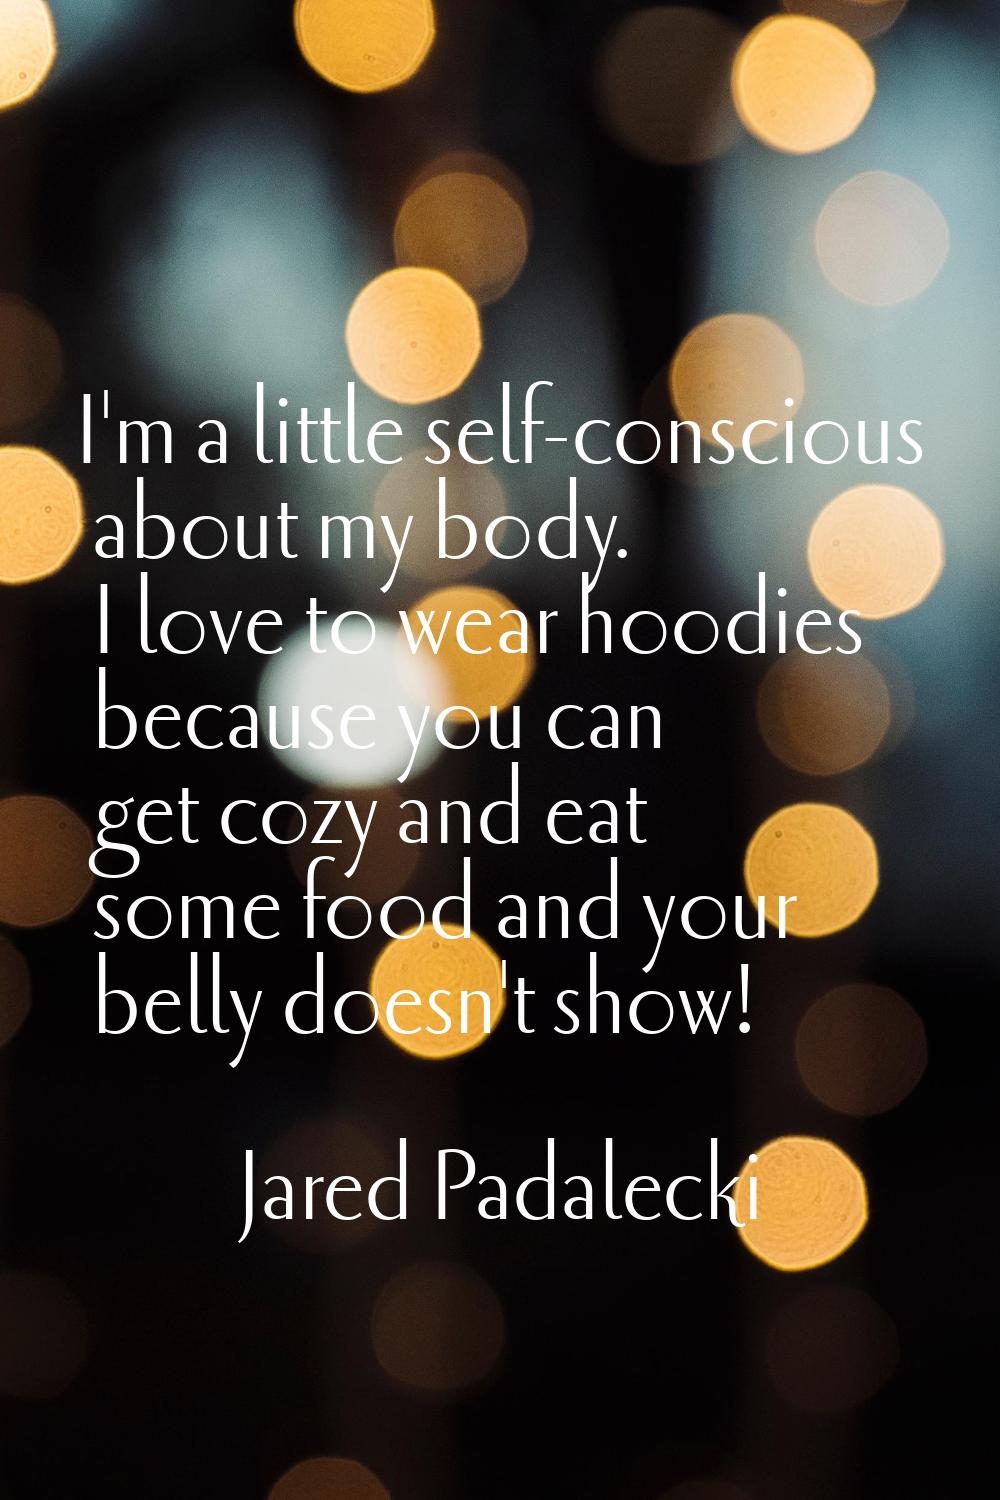 I'm a little self-conscious about my body. I love to wear hoodies because you can get cozy and eat 